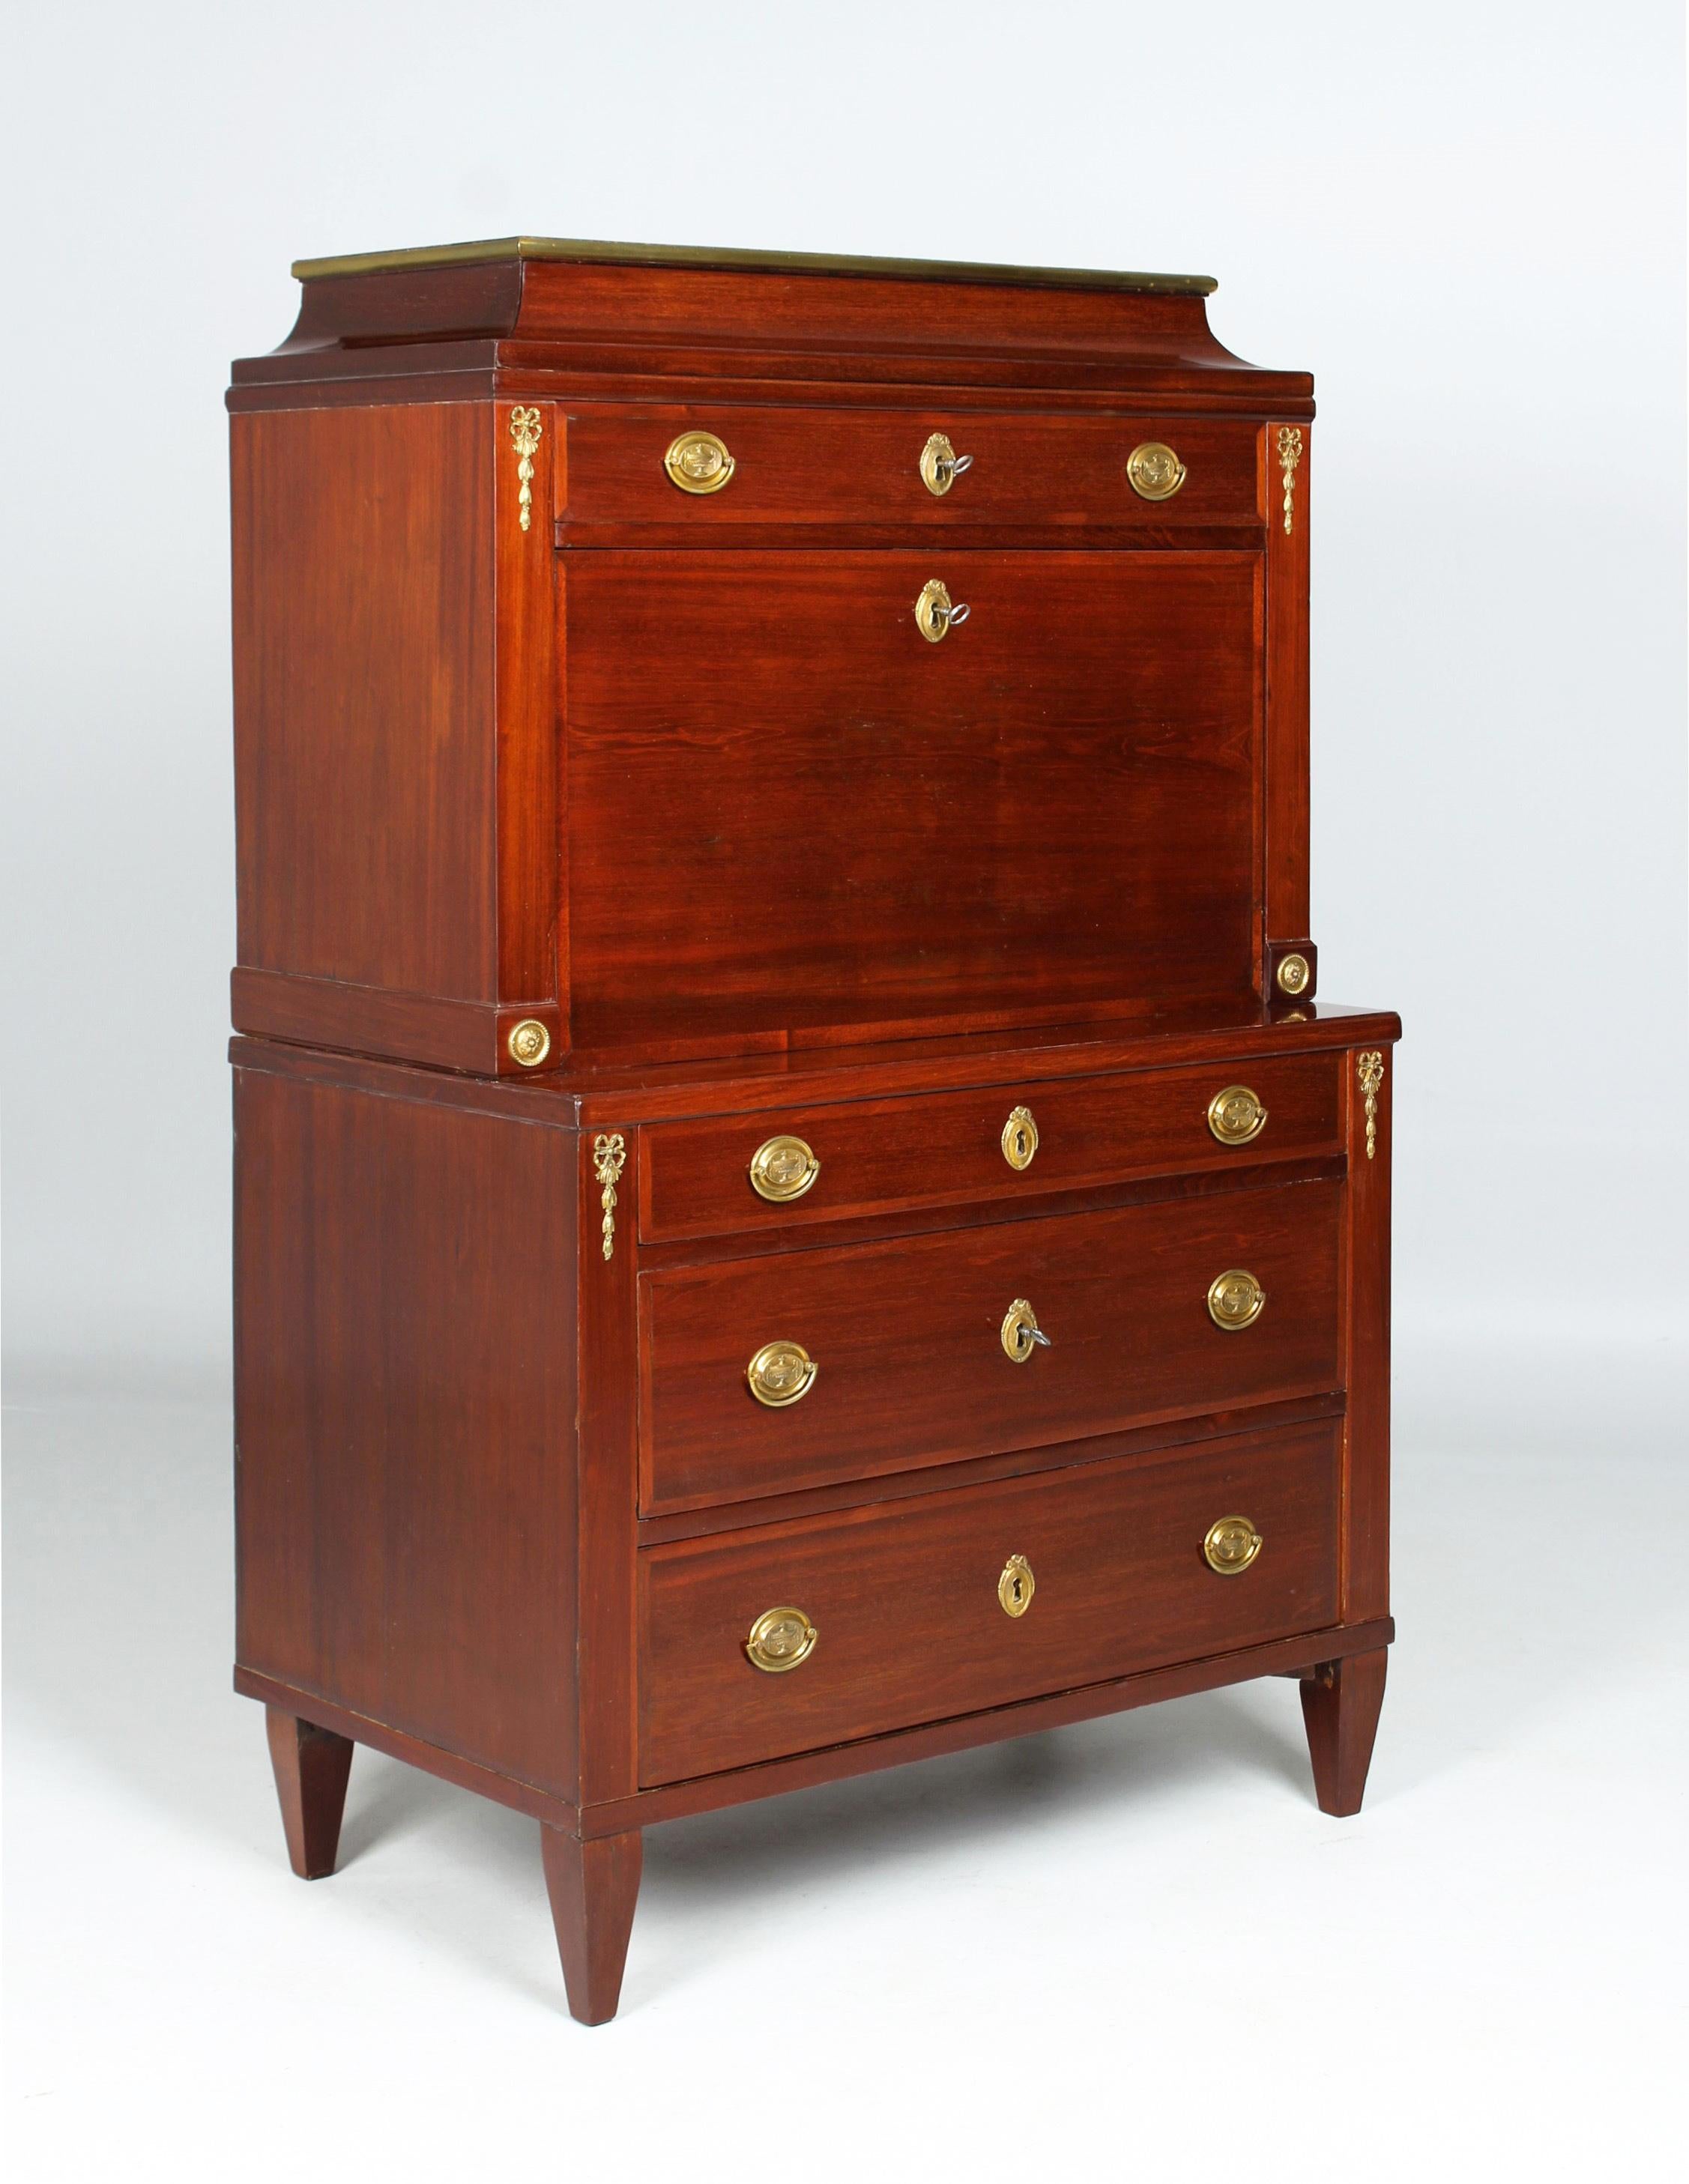 Antique secretary after designs by Friedrich Gottlob Hoffmann

Central German (Leipzig)
Mahogany, maple burl
around 1800

Dimensions: H x W x D: 144 x 89 x 51 cm

Description:
The two-part body of the piece of furniture consists of a chest of